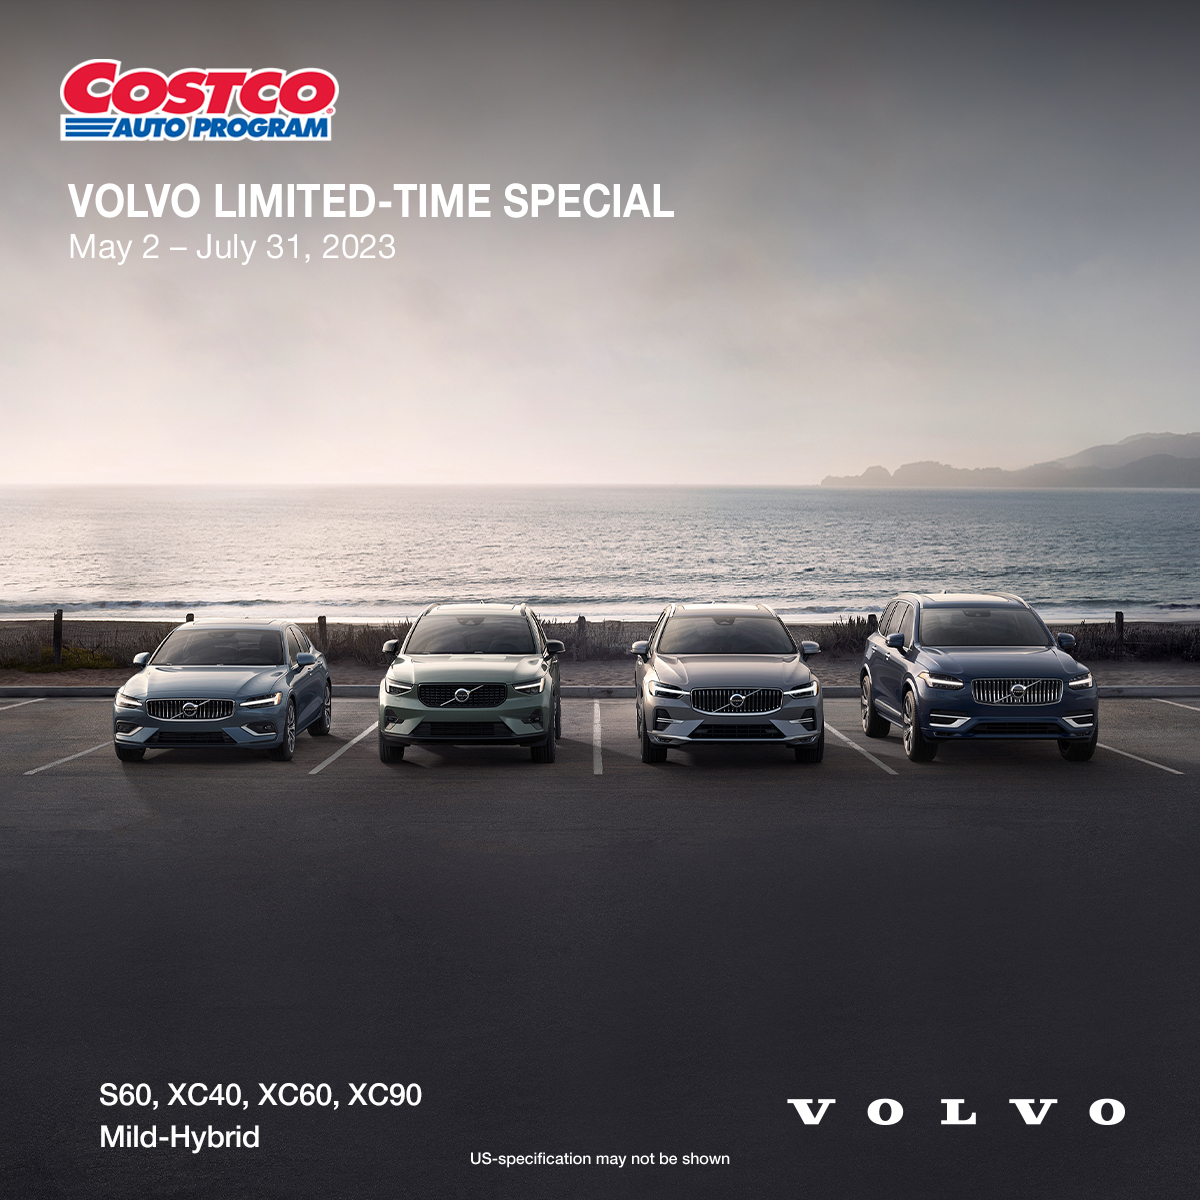 Costco members, it's time to celebrate! Get a great deal on a Volvo vehicle with member offers continuing through July 31st. Receive incentive offers of $1,000-$2,500 on new Volvo models!

Learn more with the link in our bio. 

#Costco #Volvo #SummerSavings